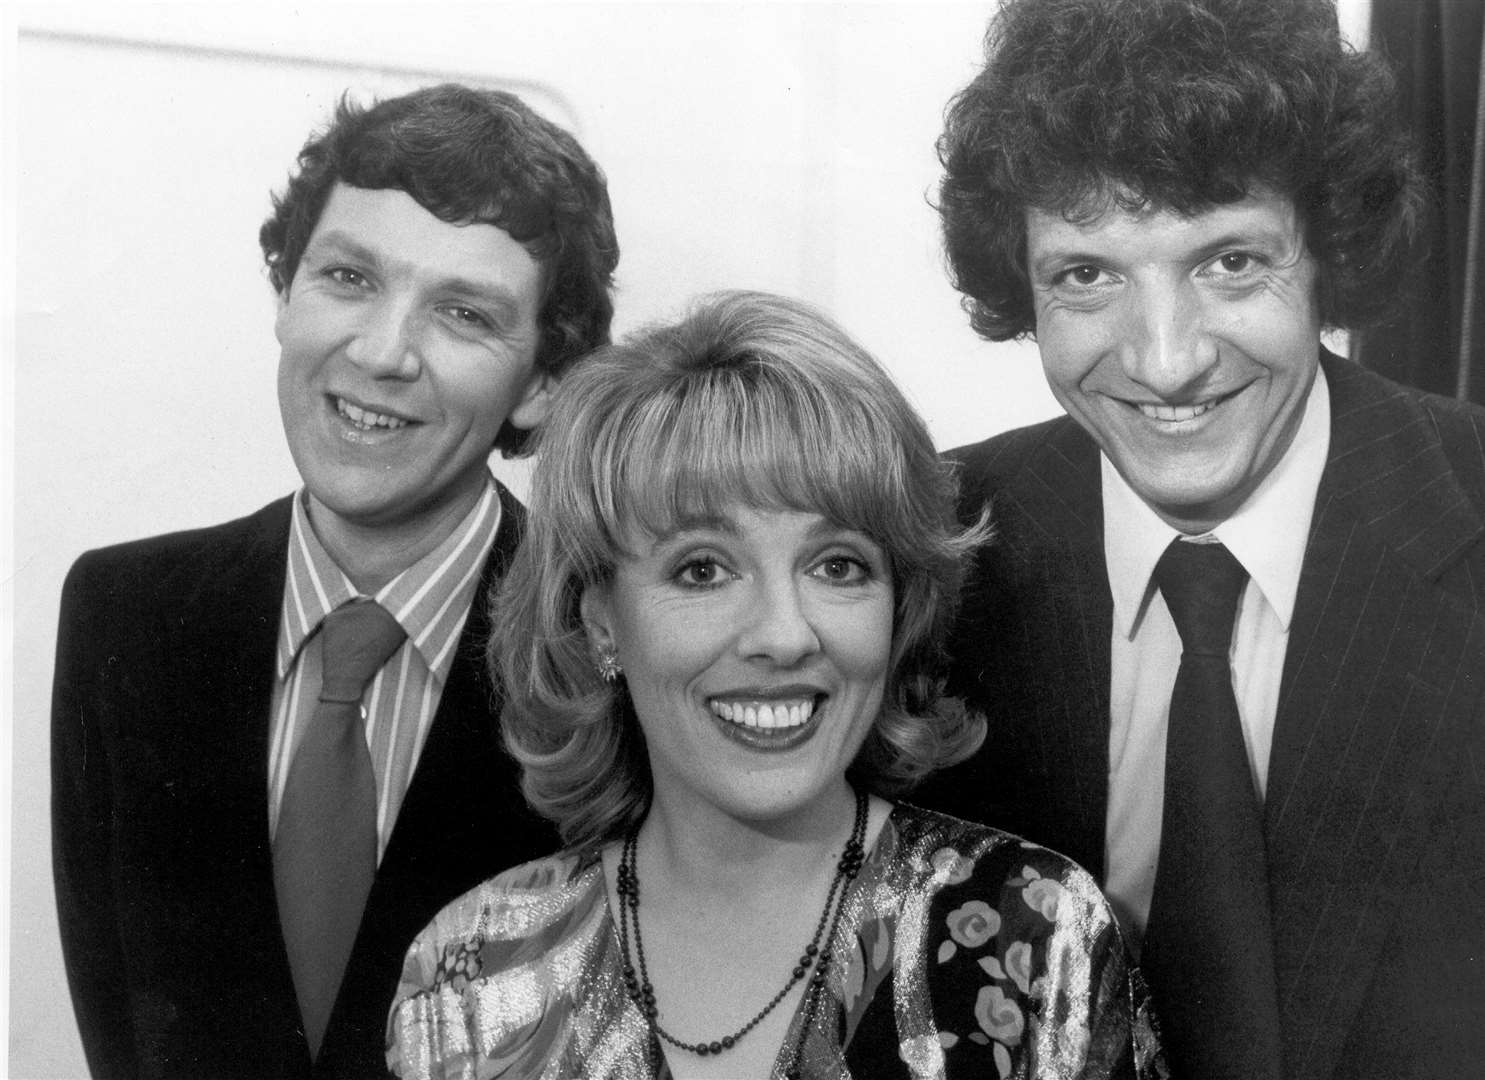 Esther with her two presenters from That's Life, Paul Heiney (left) and Chris Serle